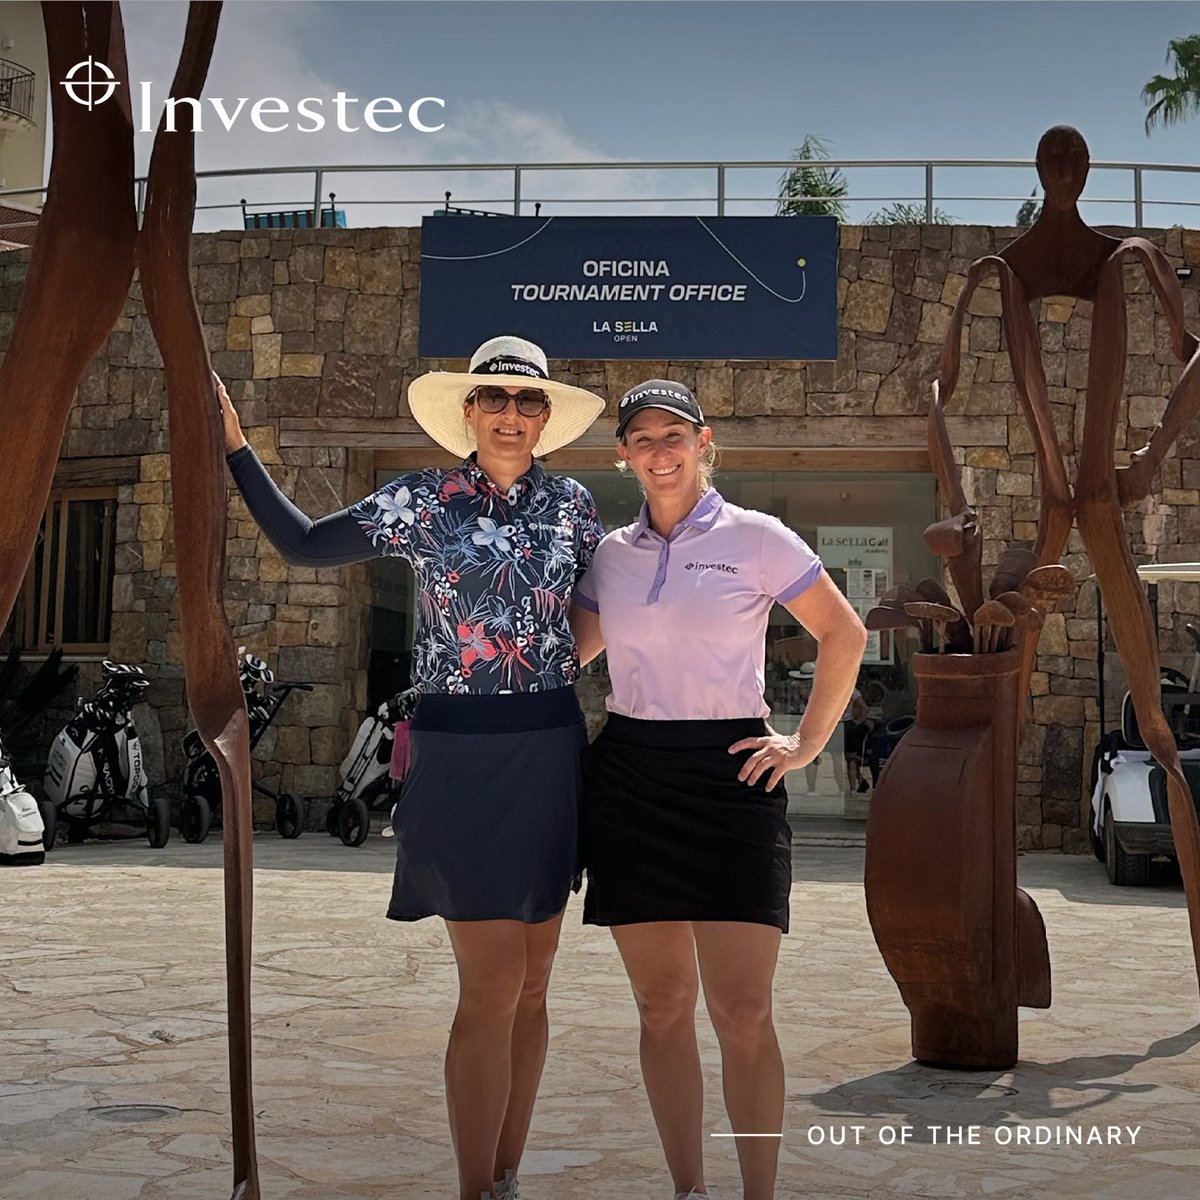 Proud to support two 🇿🇦 sponsored golfers @Nicole_Garcia72 and @stacybregman in 🇪🇸 this week, as they compete in the @lasellagolf. Greatness never settles for ordinary. #InvestecGolf #RaiseOurGame #LaSellaOpen